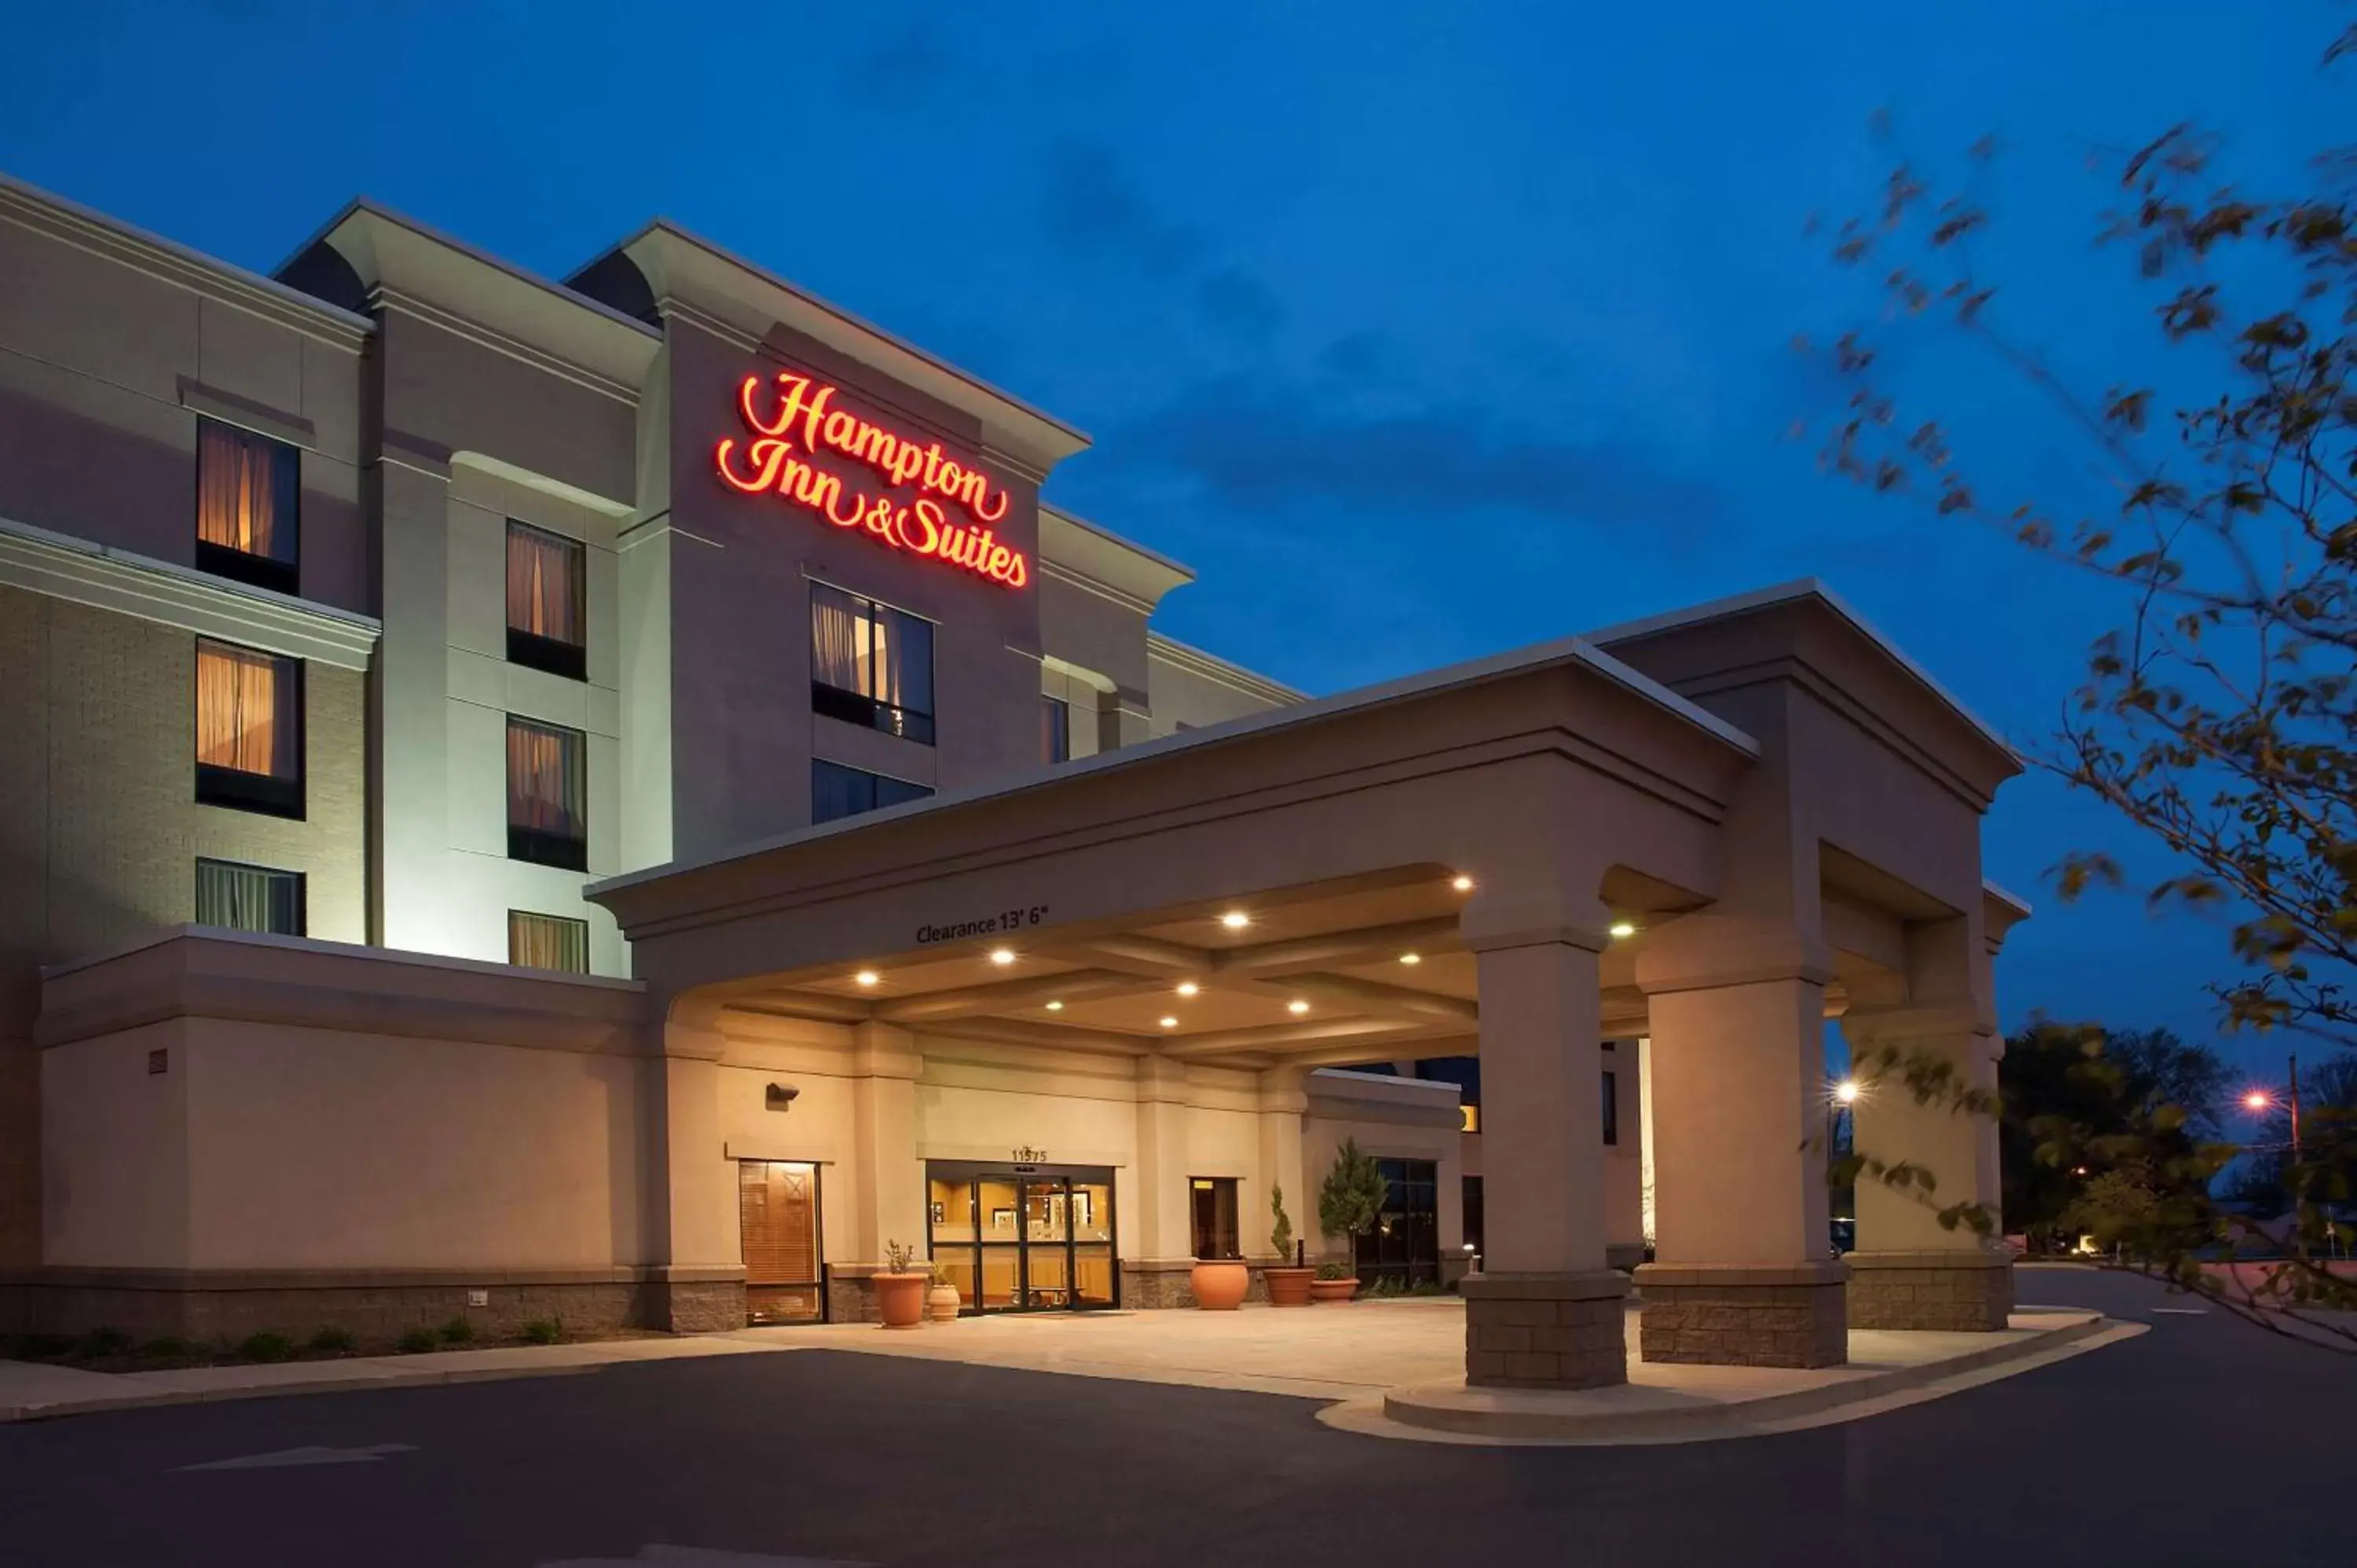 Property Building in Hampton Inn and Suites Indianapolis-Fishers